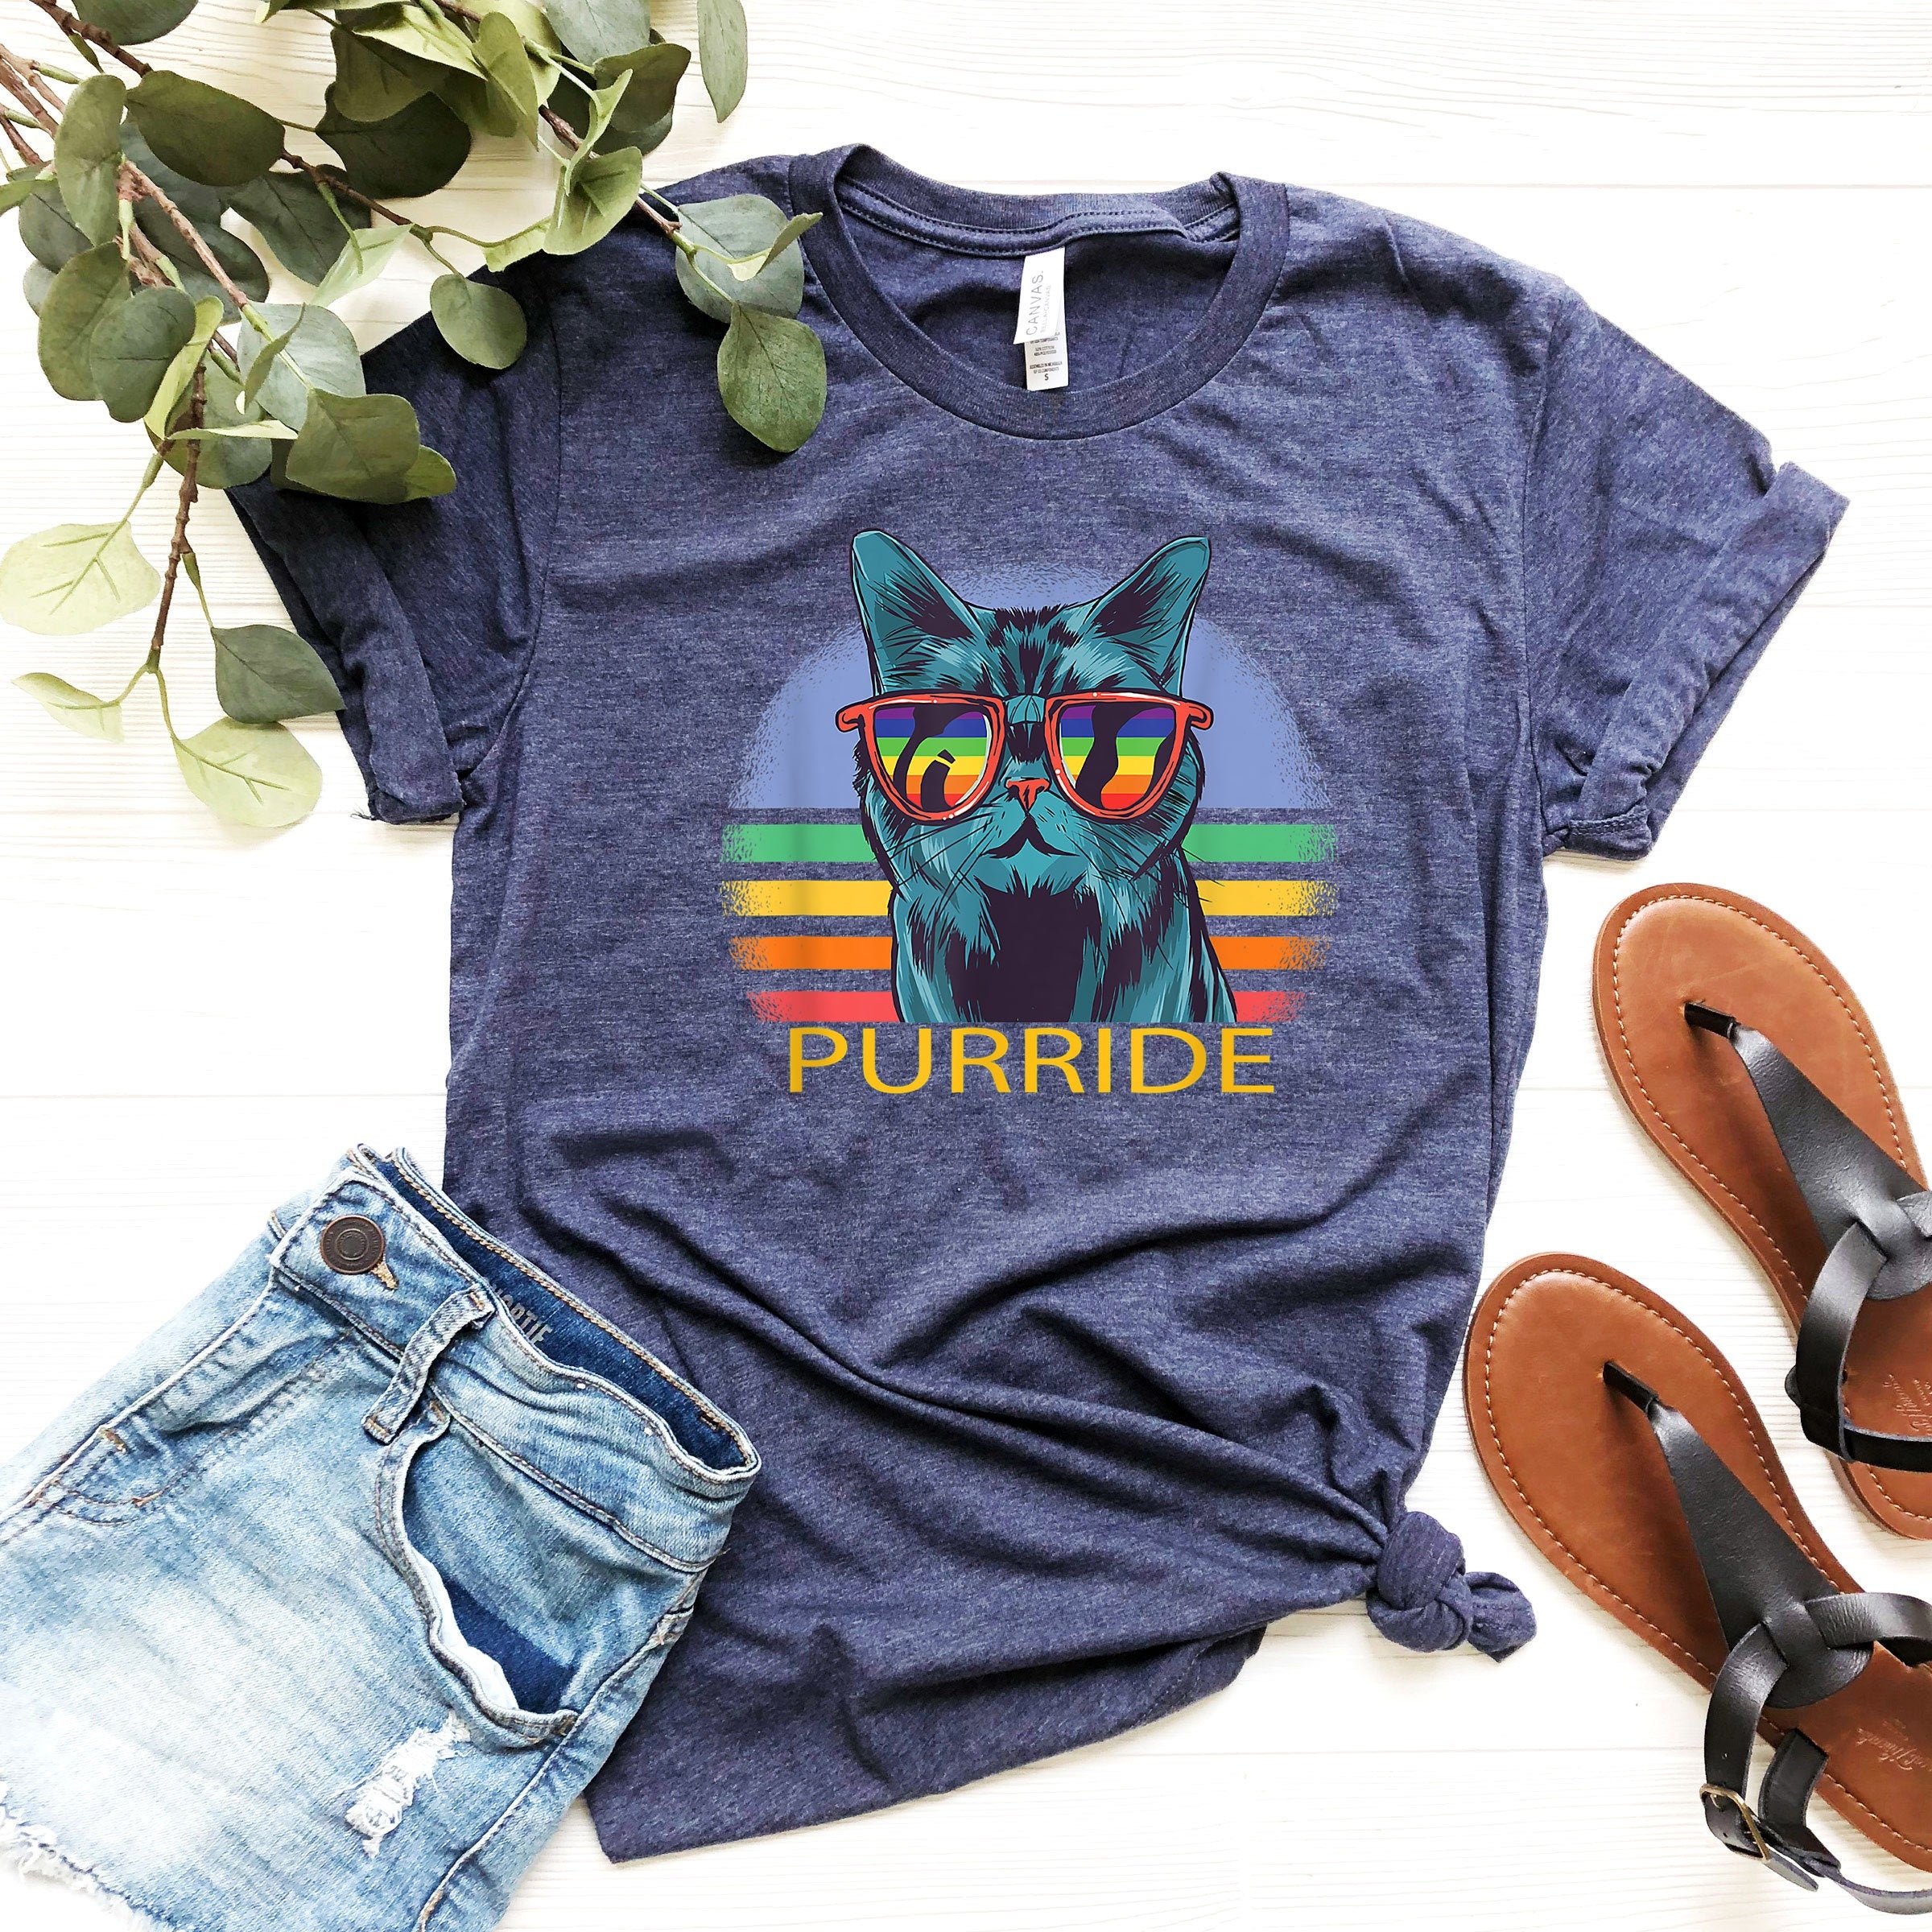 Discover Purride Cat Shirt - LGBT Proud Clothing - Pet Lover Gift - LGBTQ Flag T-Shirt - Black History Month Tee - Human Equality Clothing